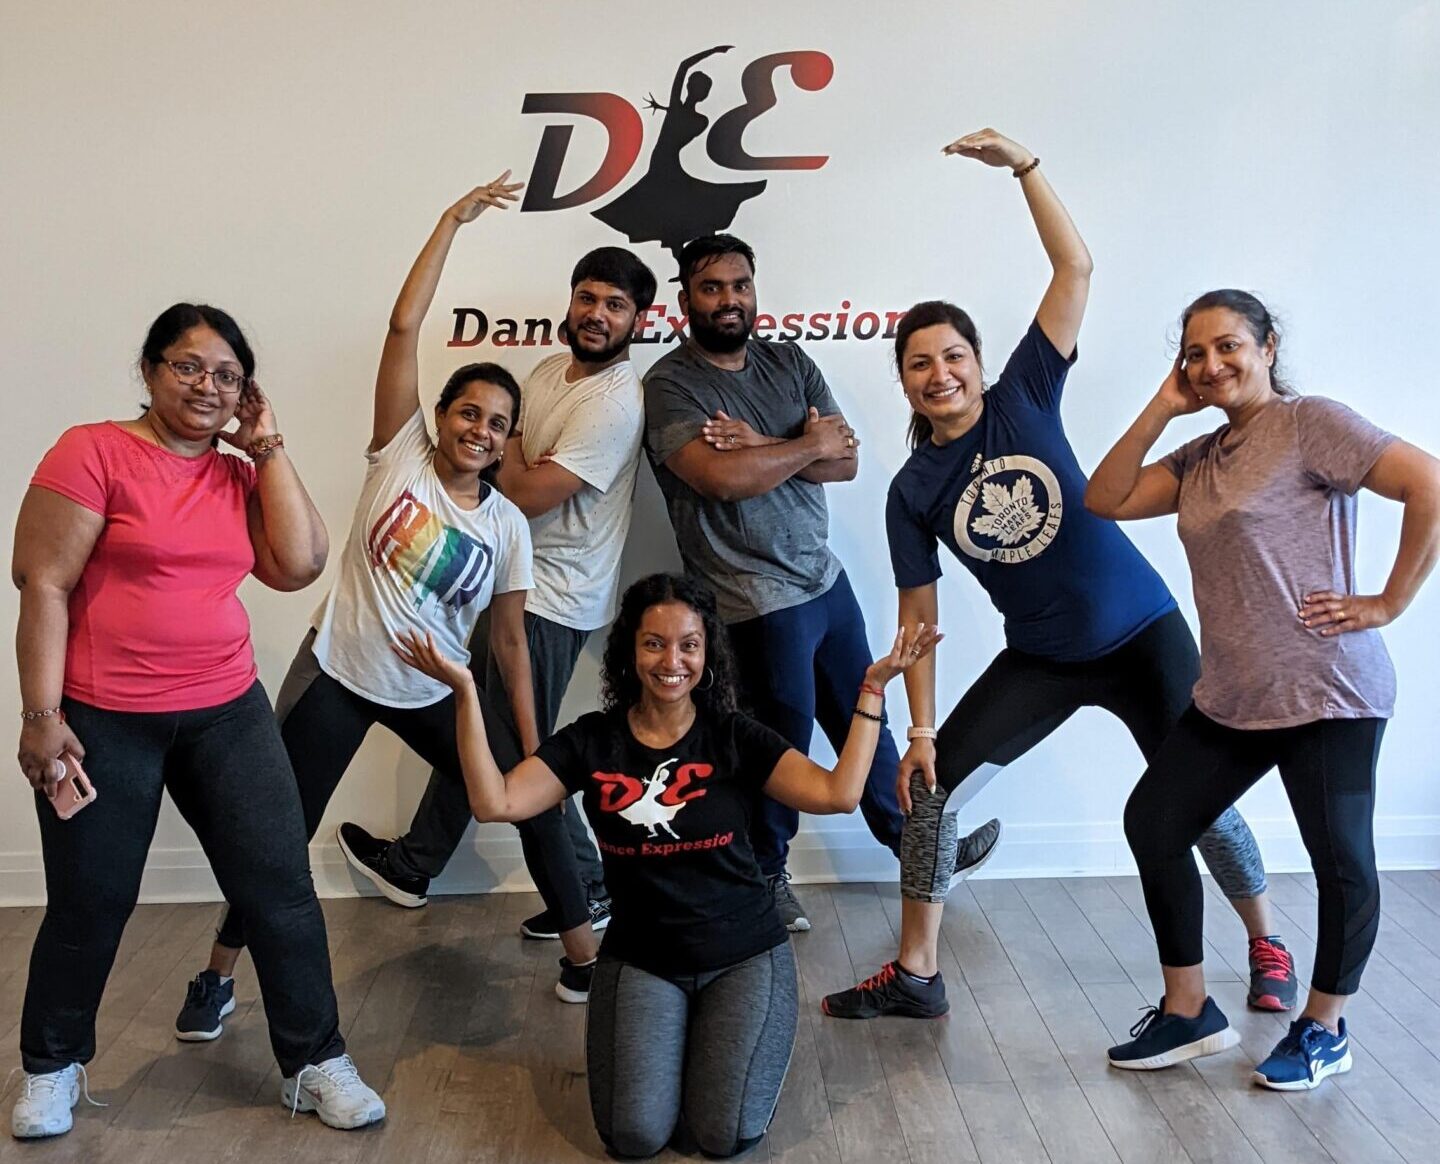 A group of adults posing with playful expressions and dance-inspired gestures in Dance Expression Studio, wearing casual workout clothes and sneakers. Behind them, the wall features the Dance Expression logo, indicating the lively and inclusive atmosphere of the dance class they are attending.